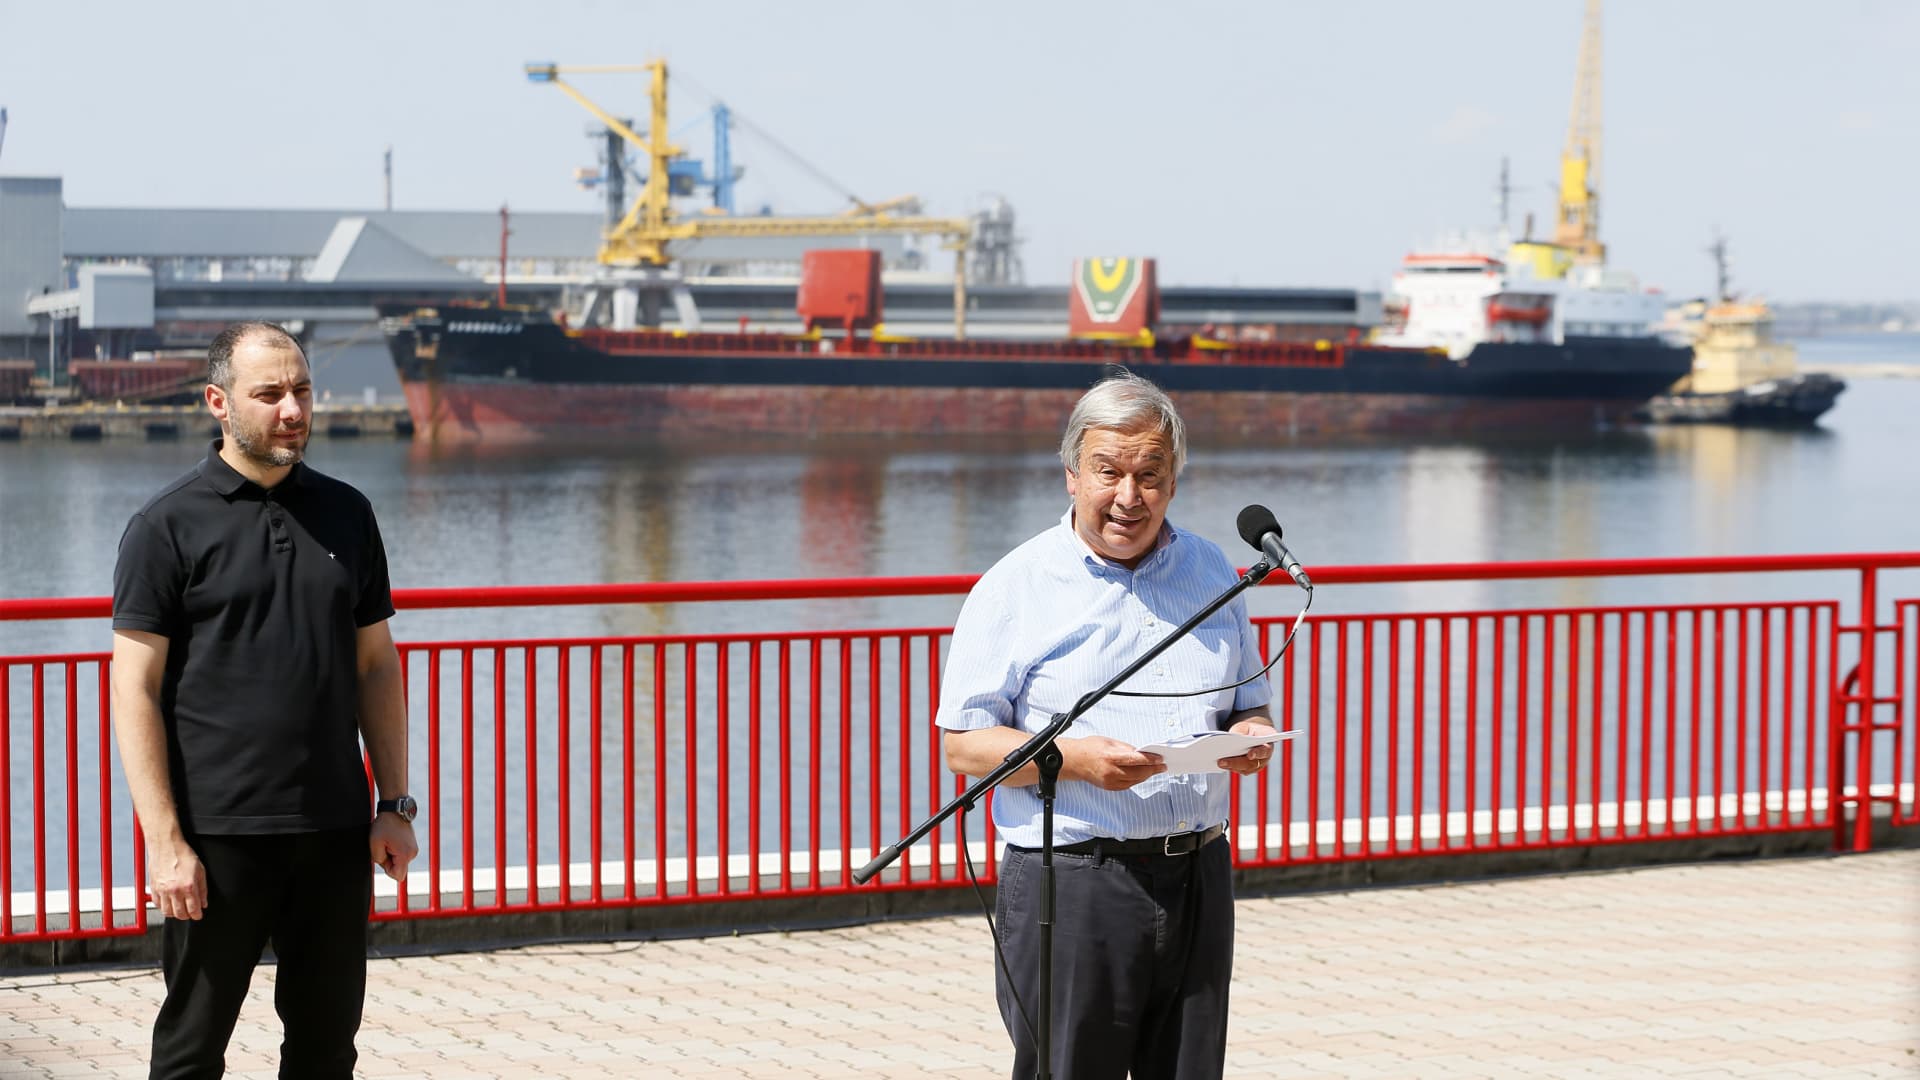 UN Secretary-General Antonio Guterres (R) makes a speech during a joint press conference with Ukrainian Minister of Infrastructure Oleksandr Kubrakov (L) in Odesa, Ukraine on August 19, 2022.